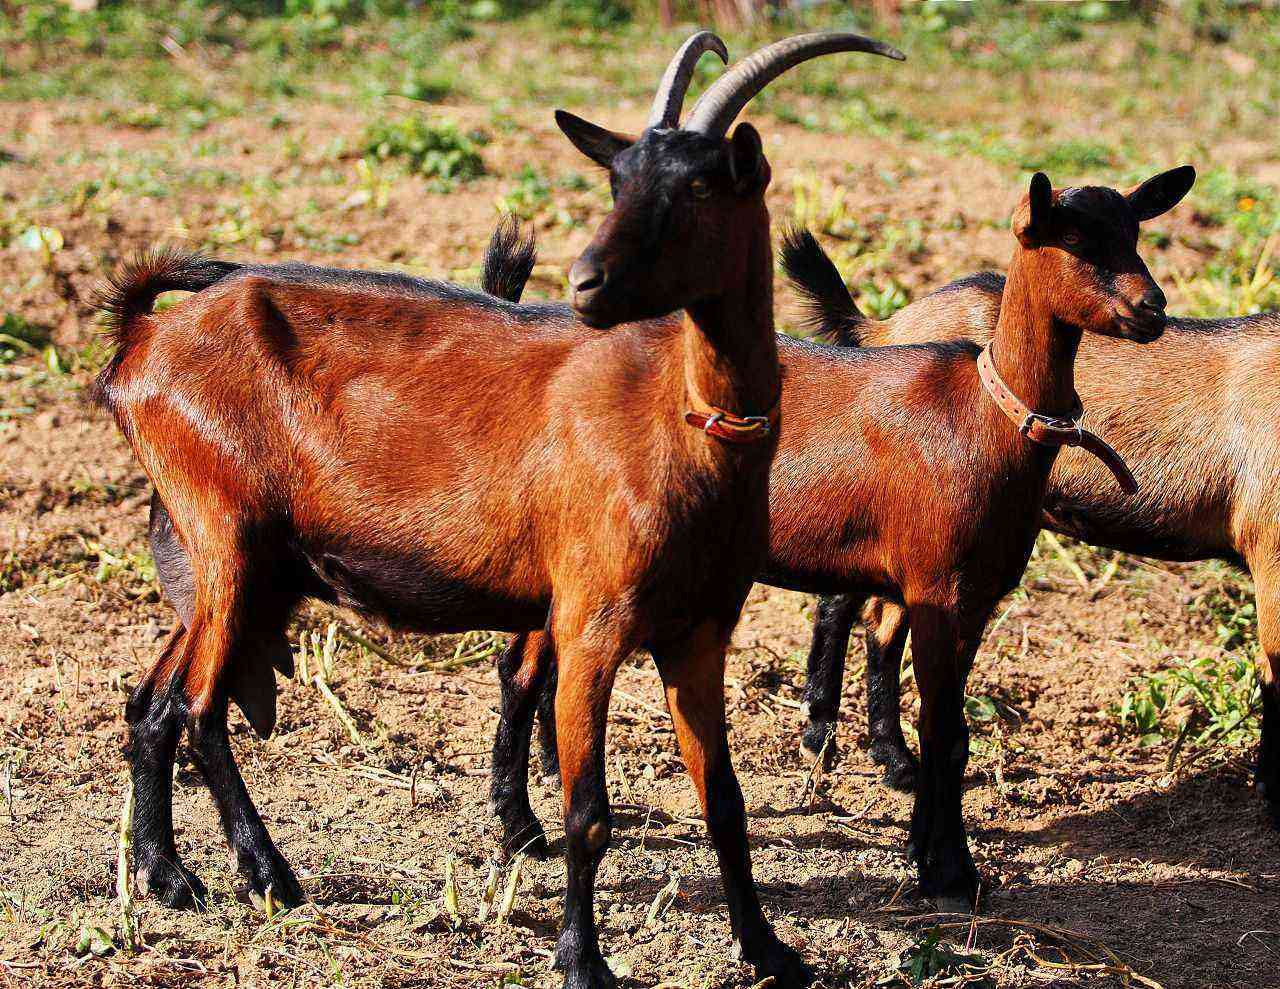 Overview of Czech goats - the main characteristics and features of the content